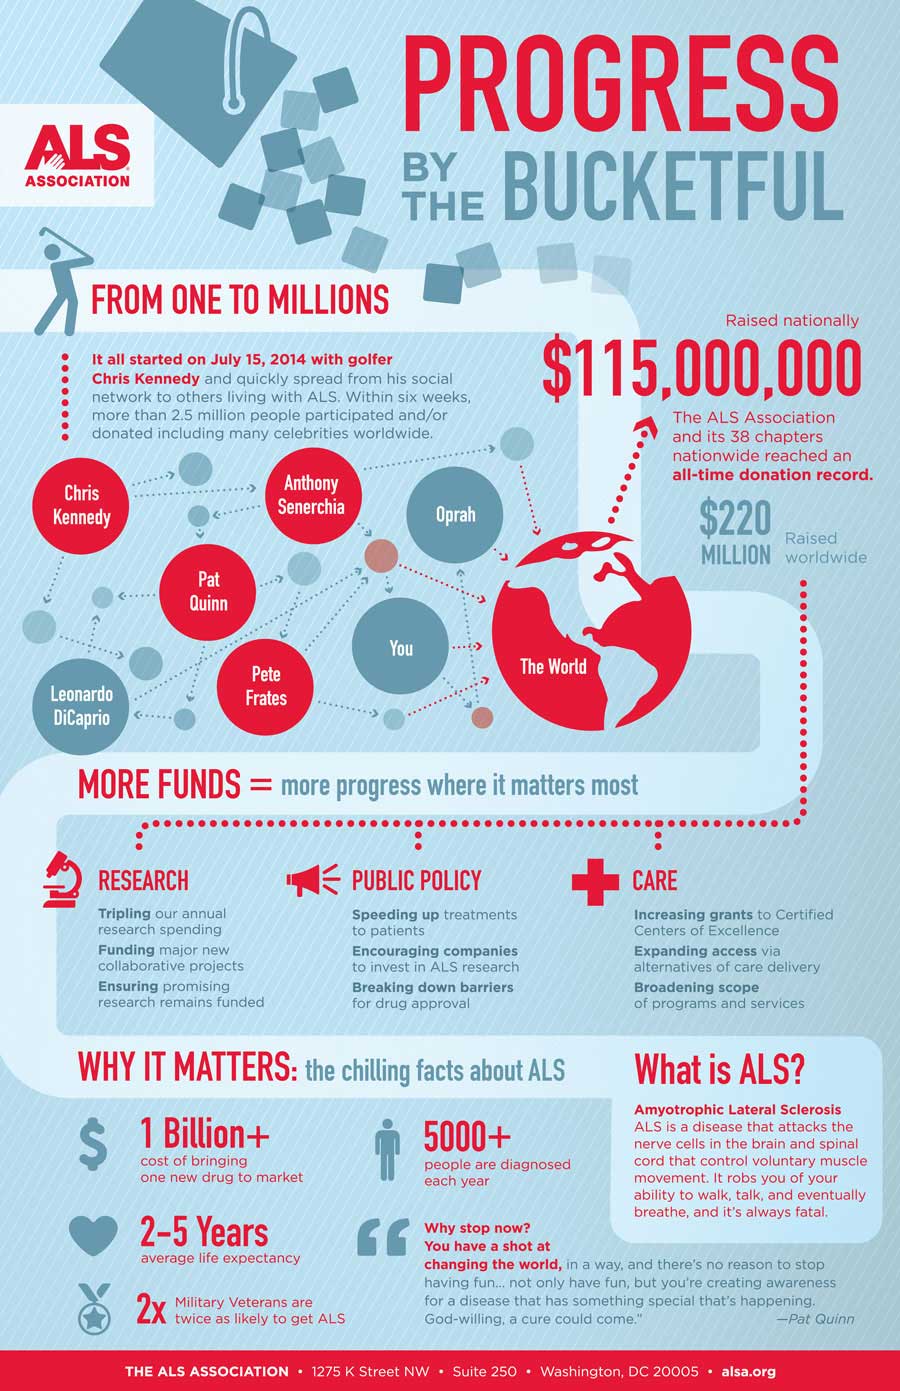 Amyotrophic Lateral Sclerosis (ALS) Association’s Progress by the Bucketful Infographic